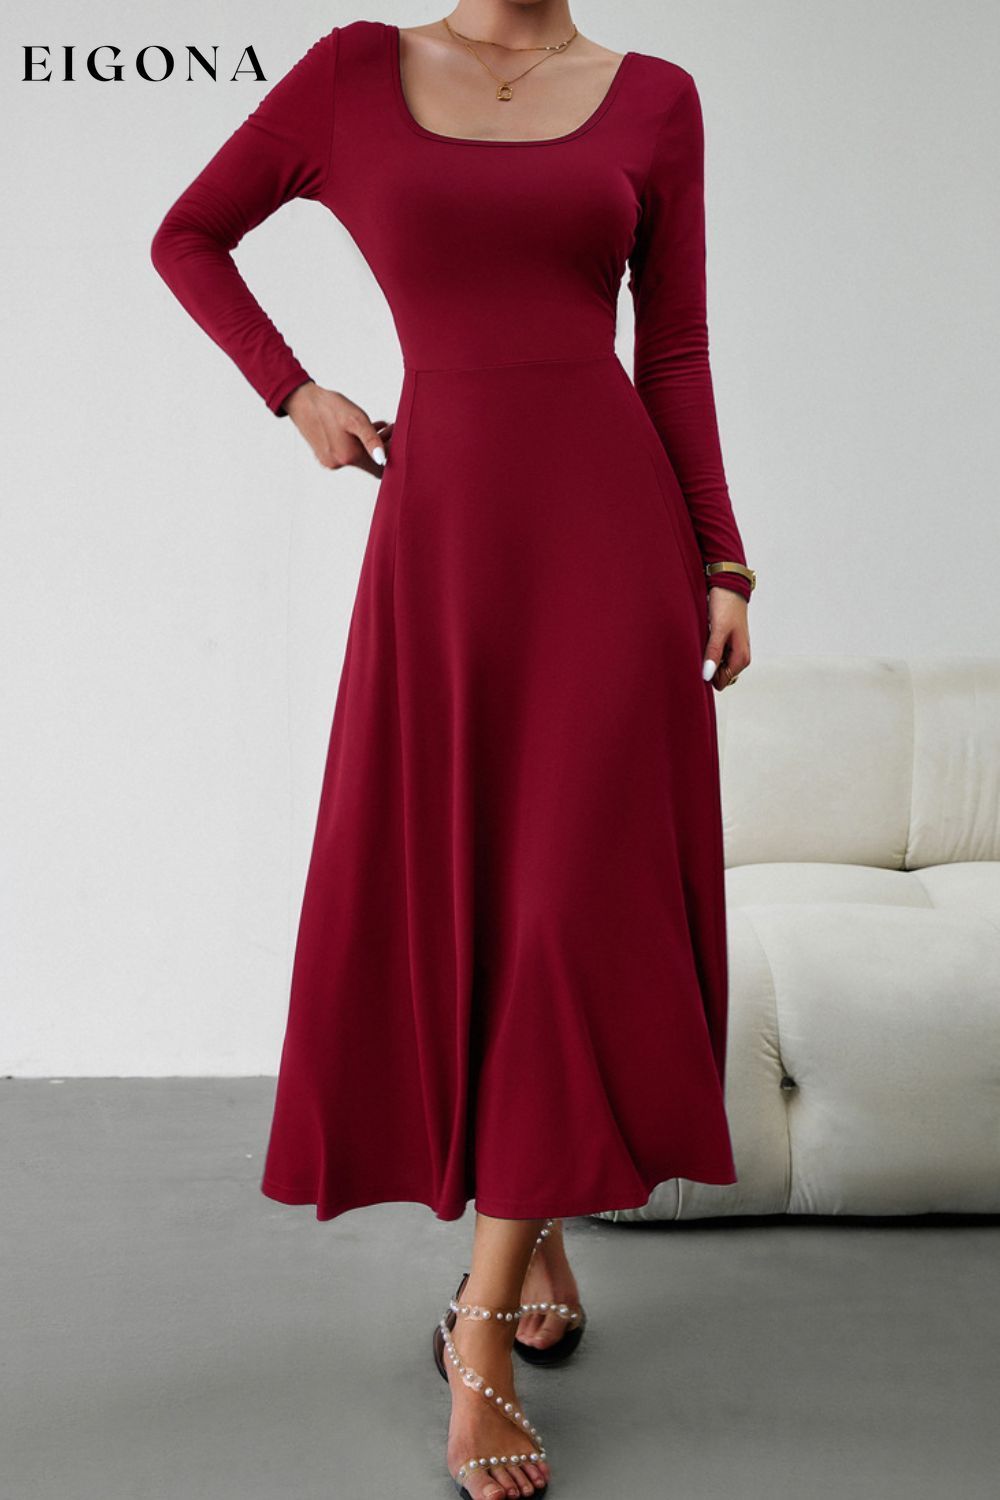 Scoop Neck Long Sleeve Lace-Up Maxi Dress Wine clothes dress dresses DY long dress maxi dress Ship From Overseas